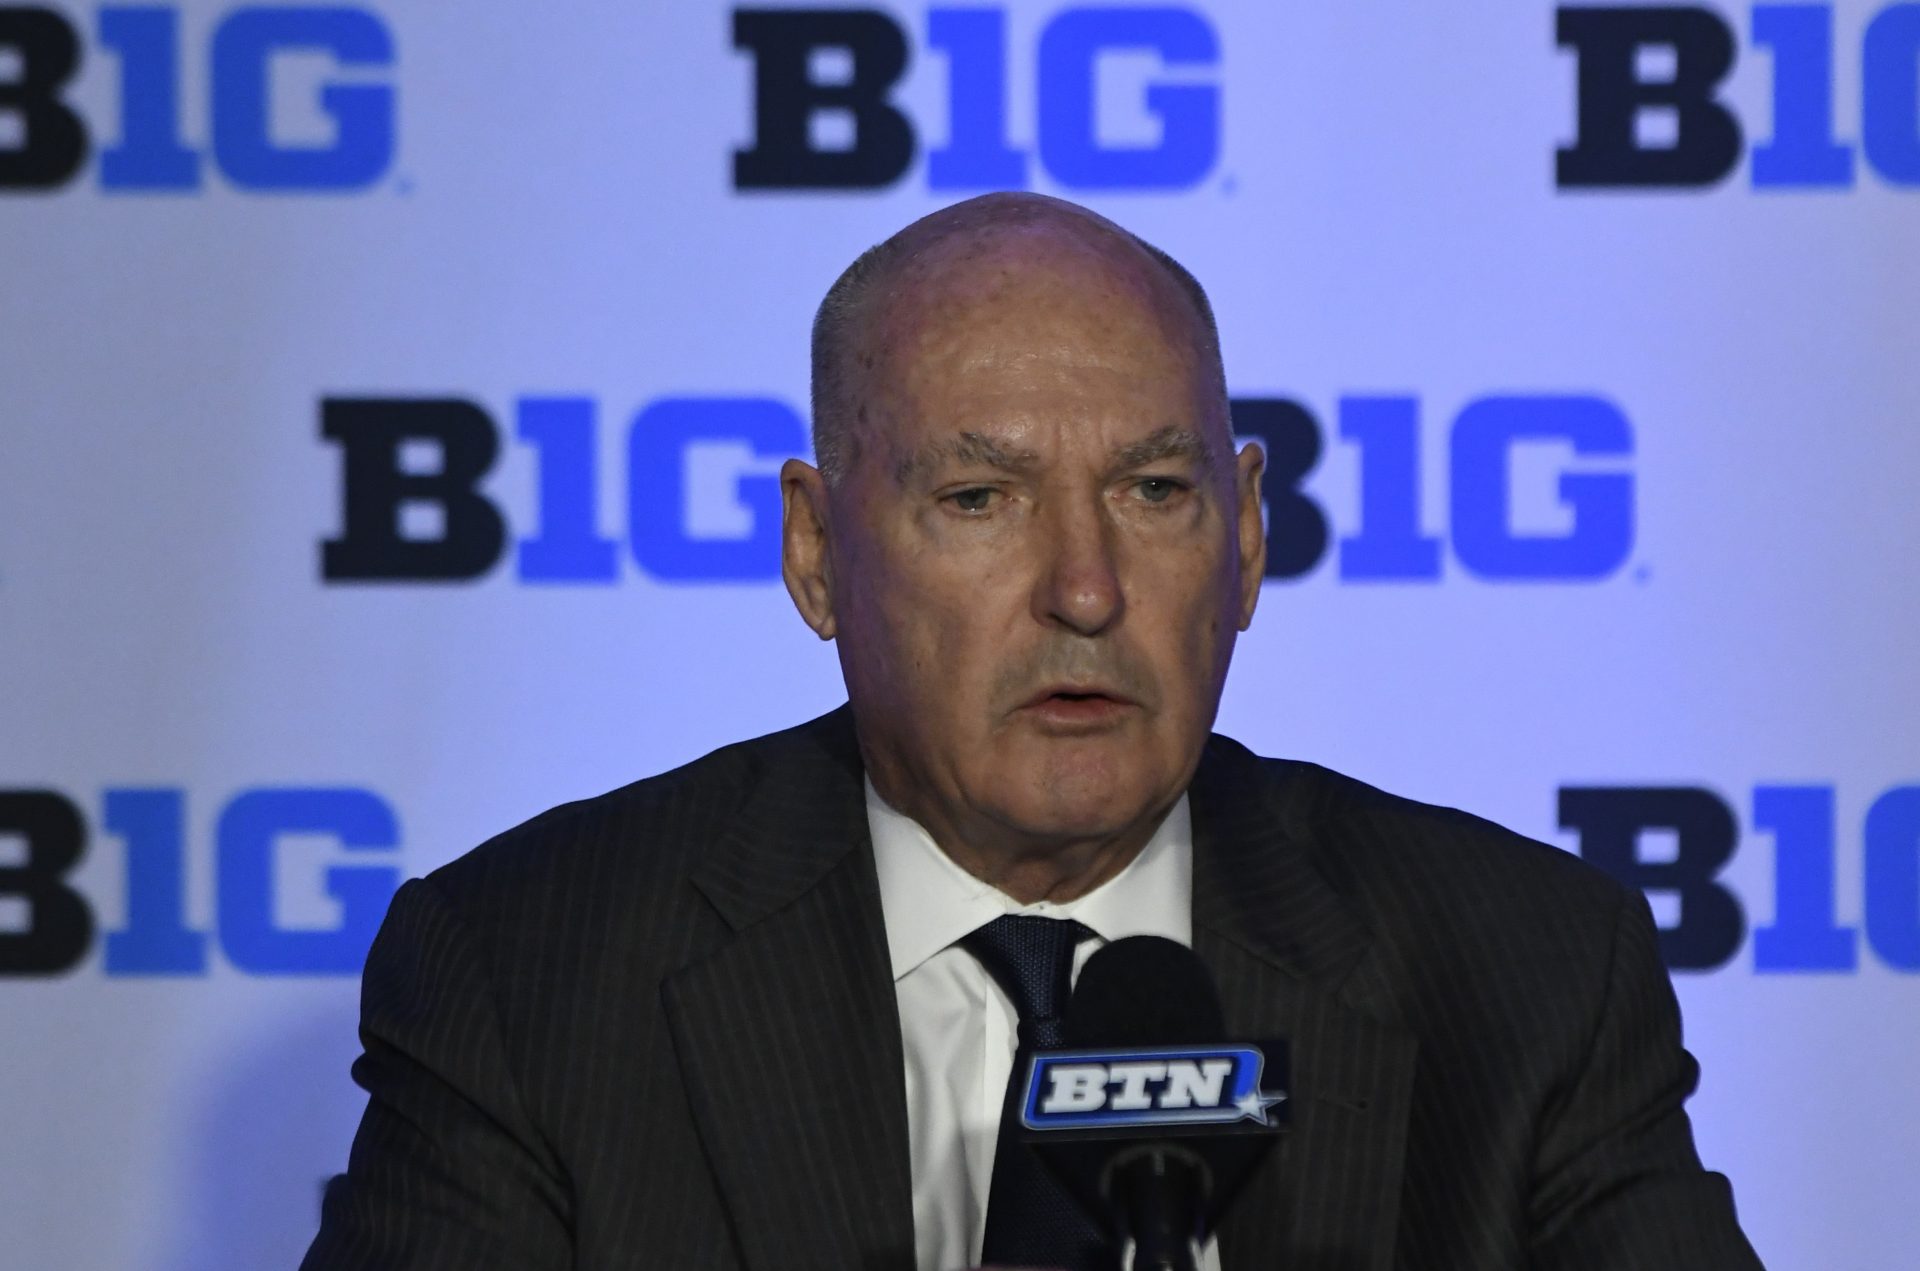 Big Ten Commissioner Jim Delany speaks at a press conference during the Big Ten conference NCAA college basketball media day Wednesday, Oct. 2, 2019, in Rosemont, Ill. 